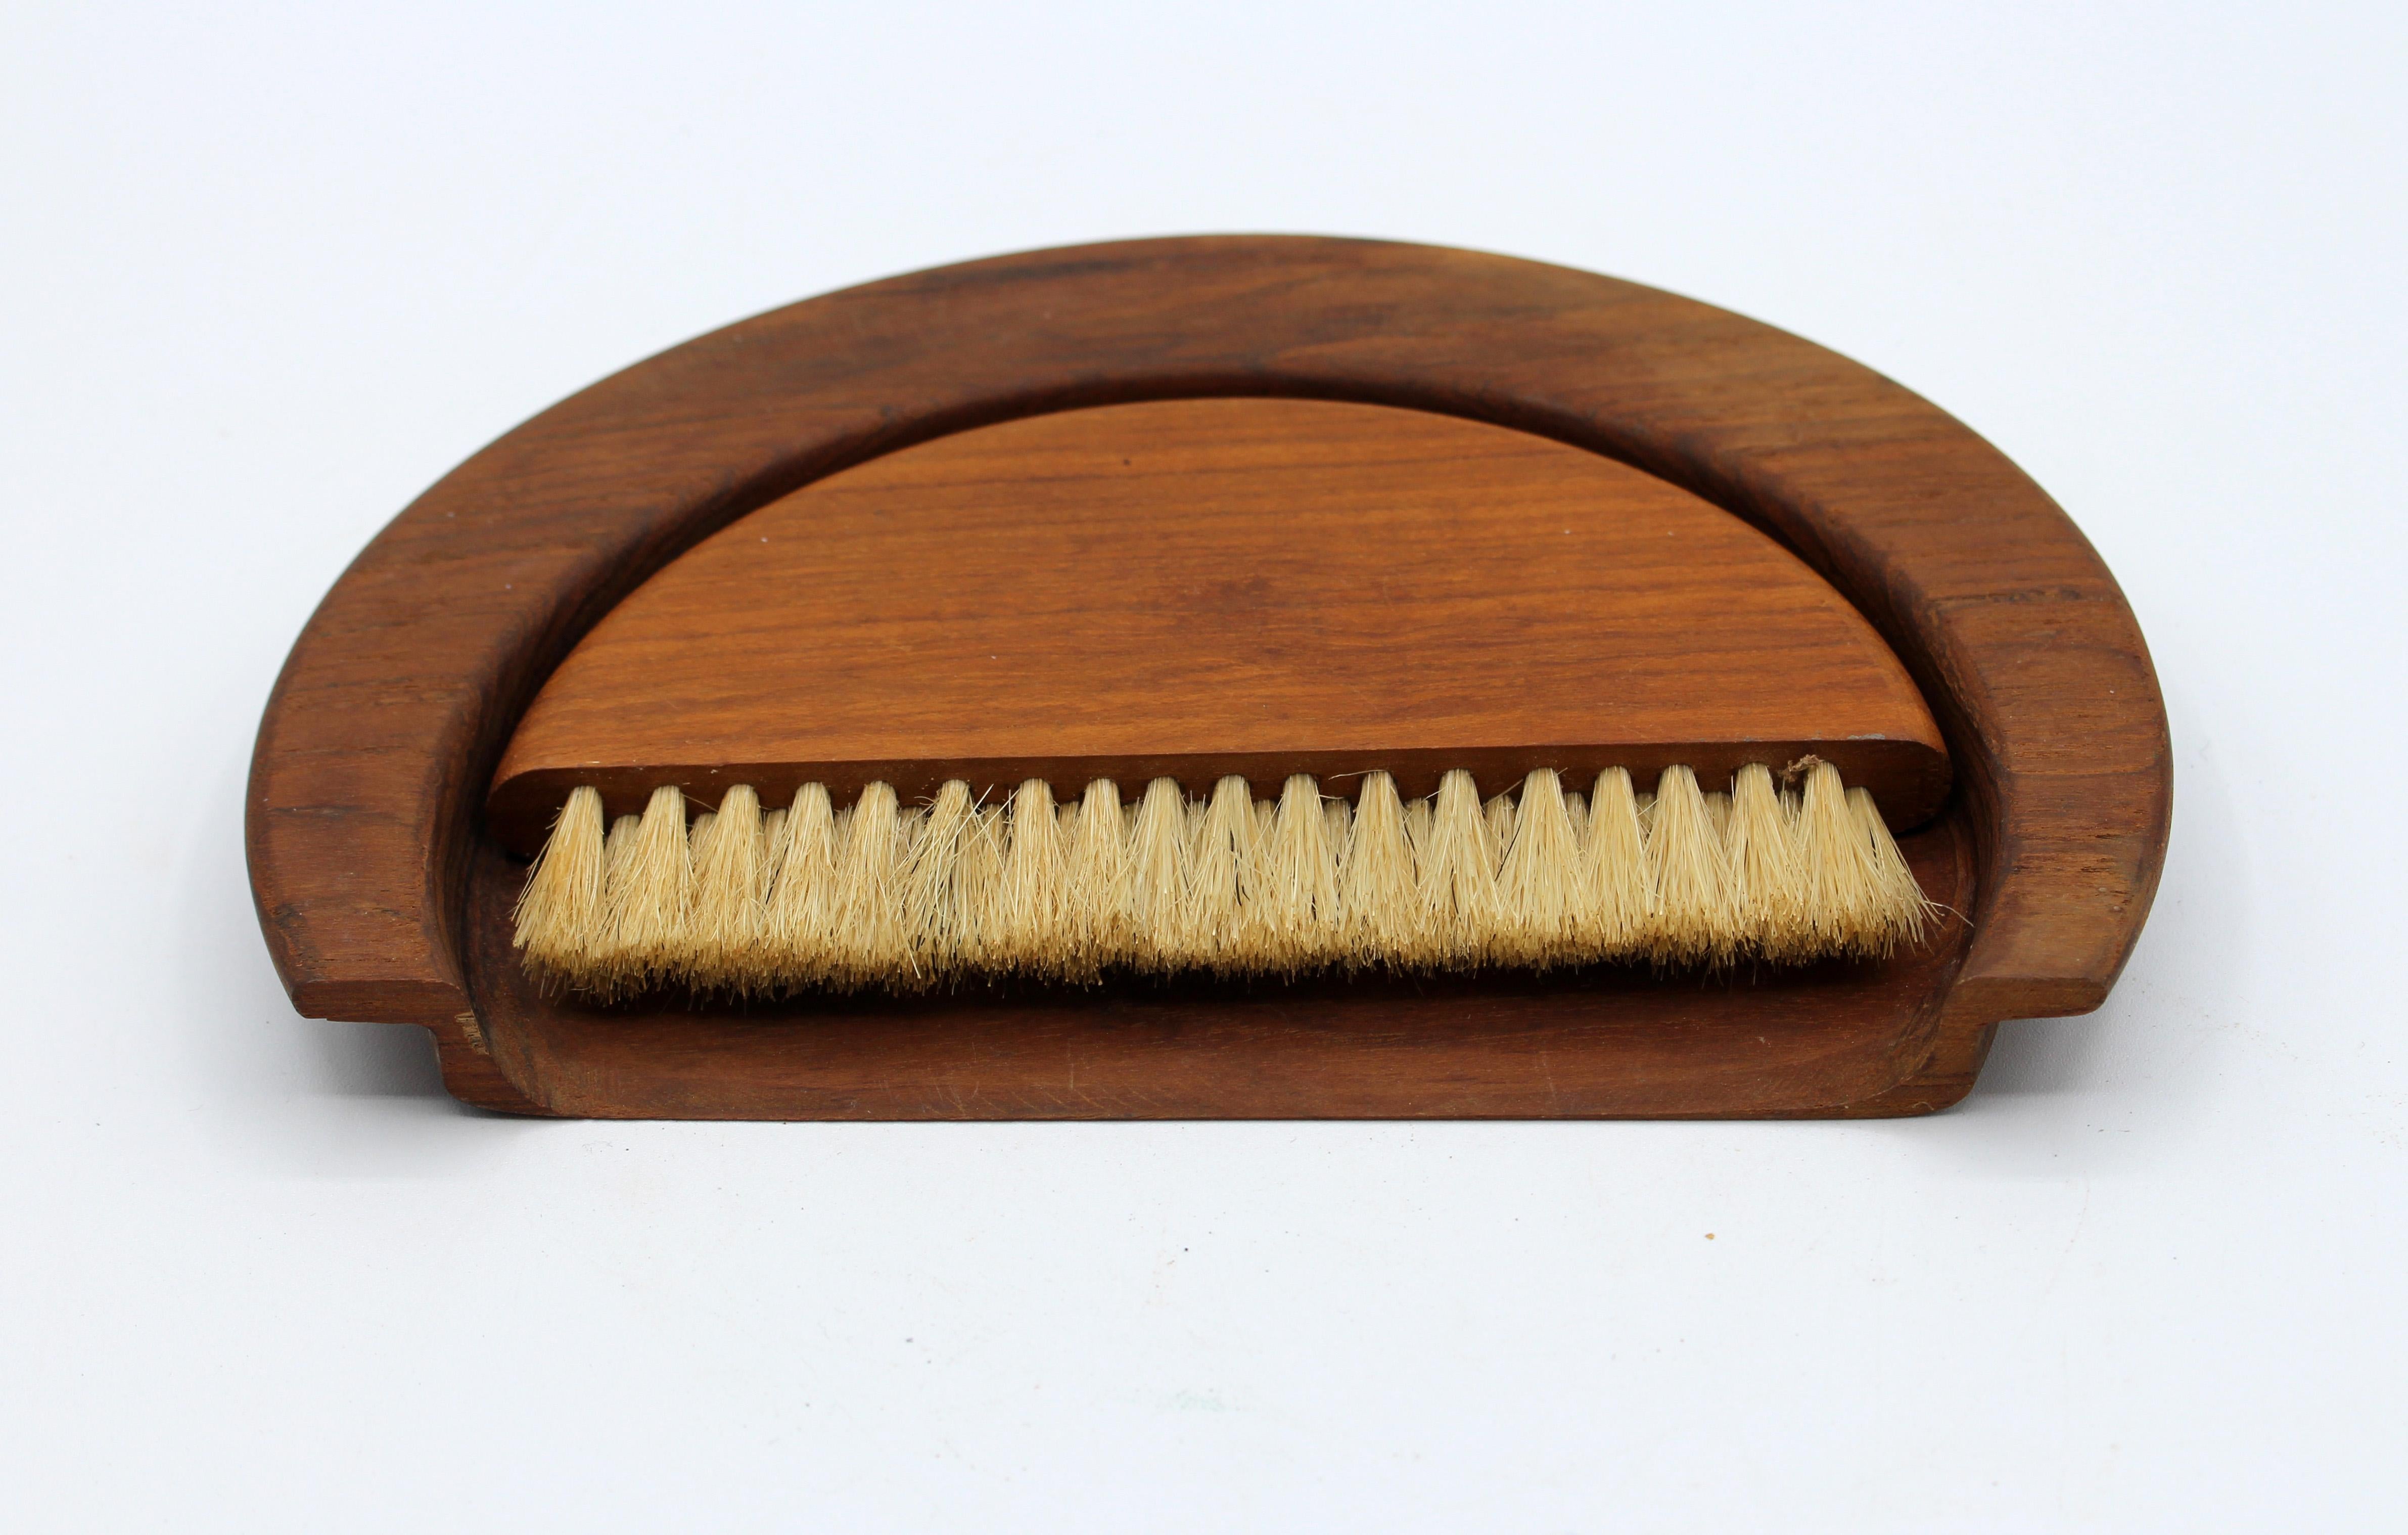 An early Mid-Century Modern period silent butler or table crumber by Kay Bojesen (Denmark, 1886-1958). Teak. Danish copyright. Marked fully on tray base.

Measures: 7 5/8